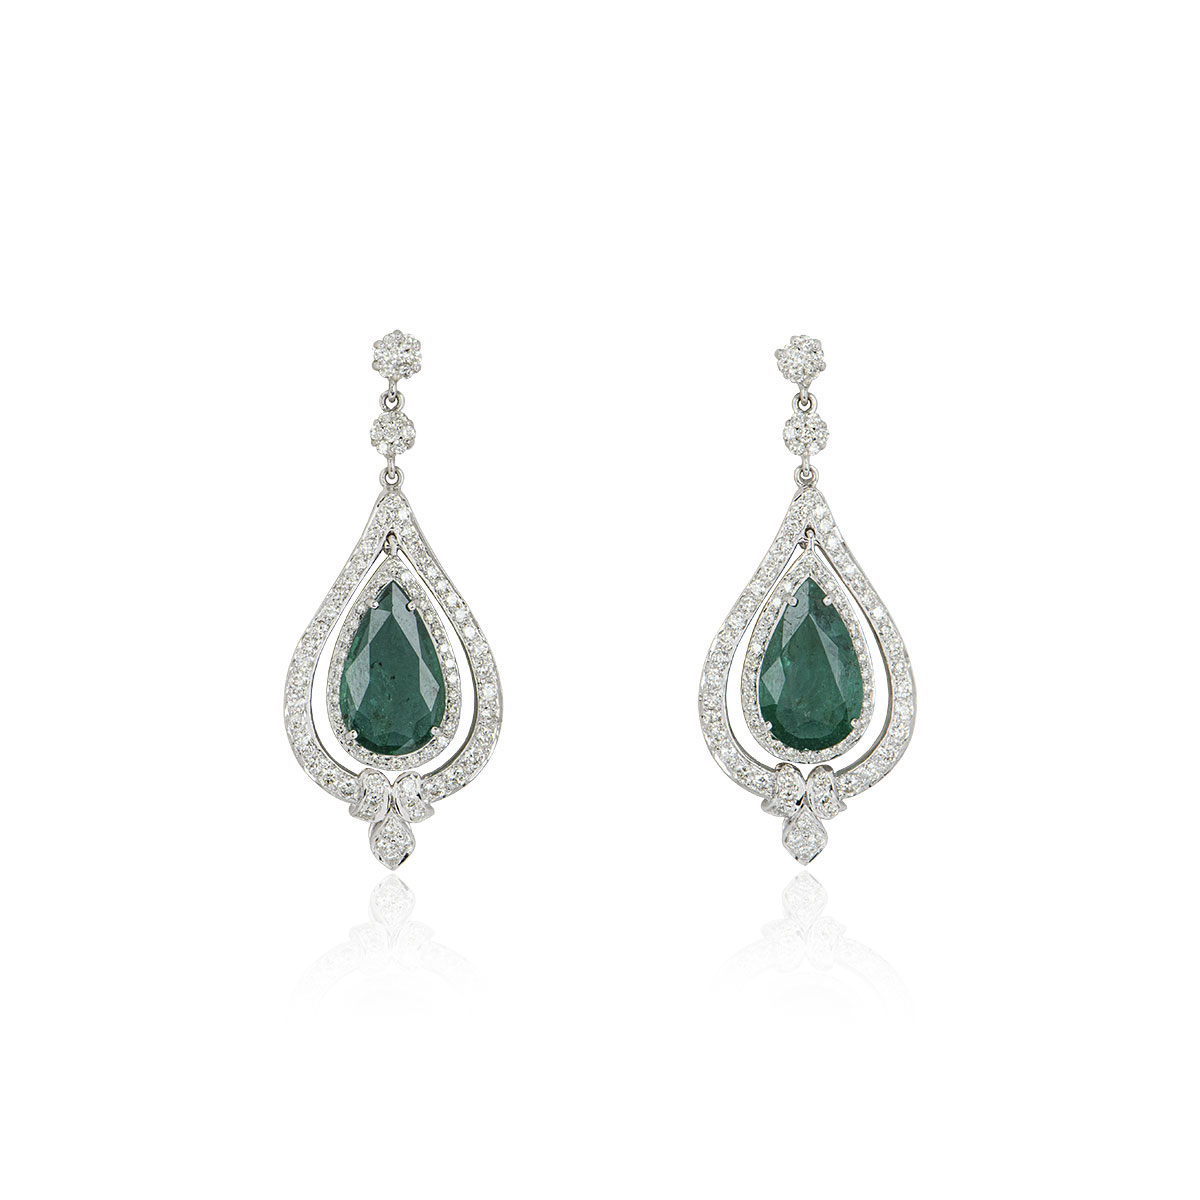 White Gold Emerald and Diamond Earrings